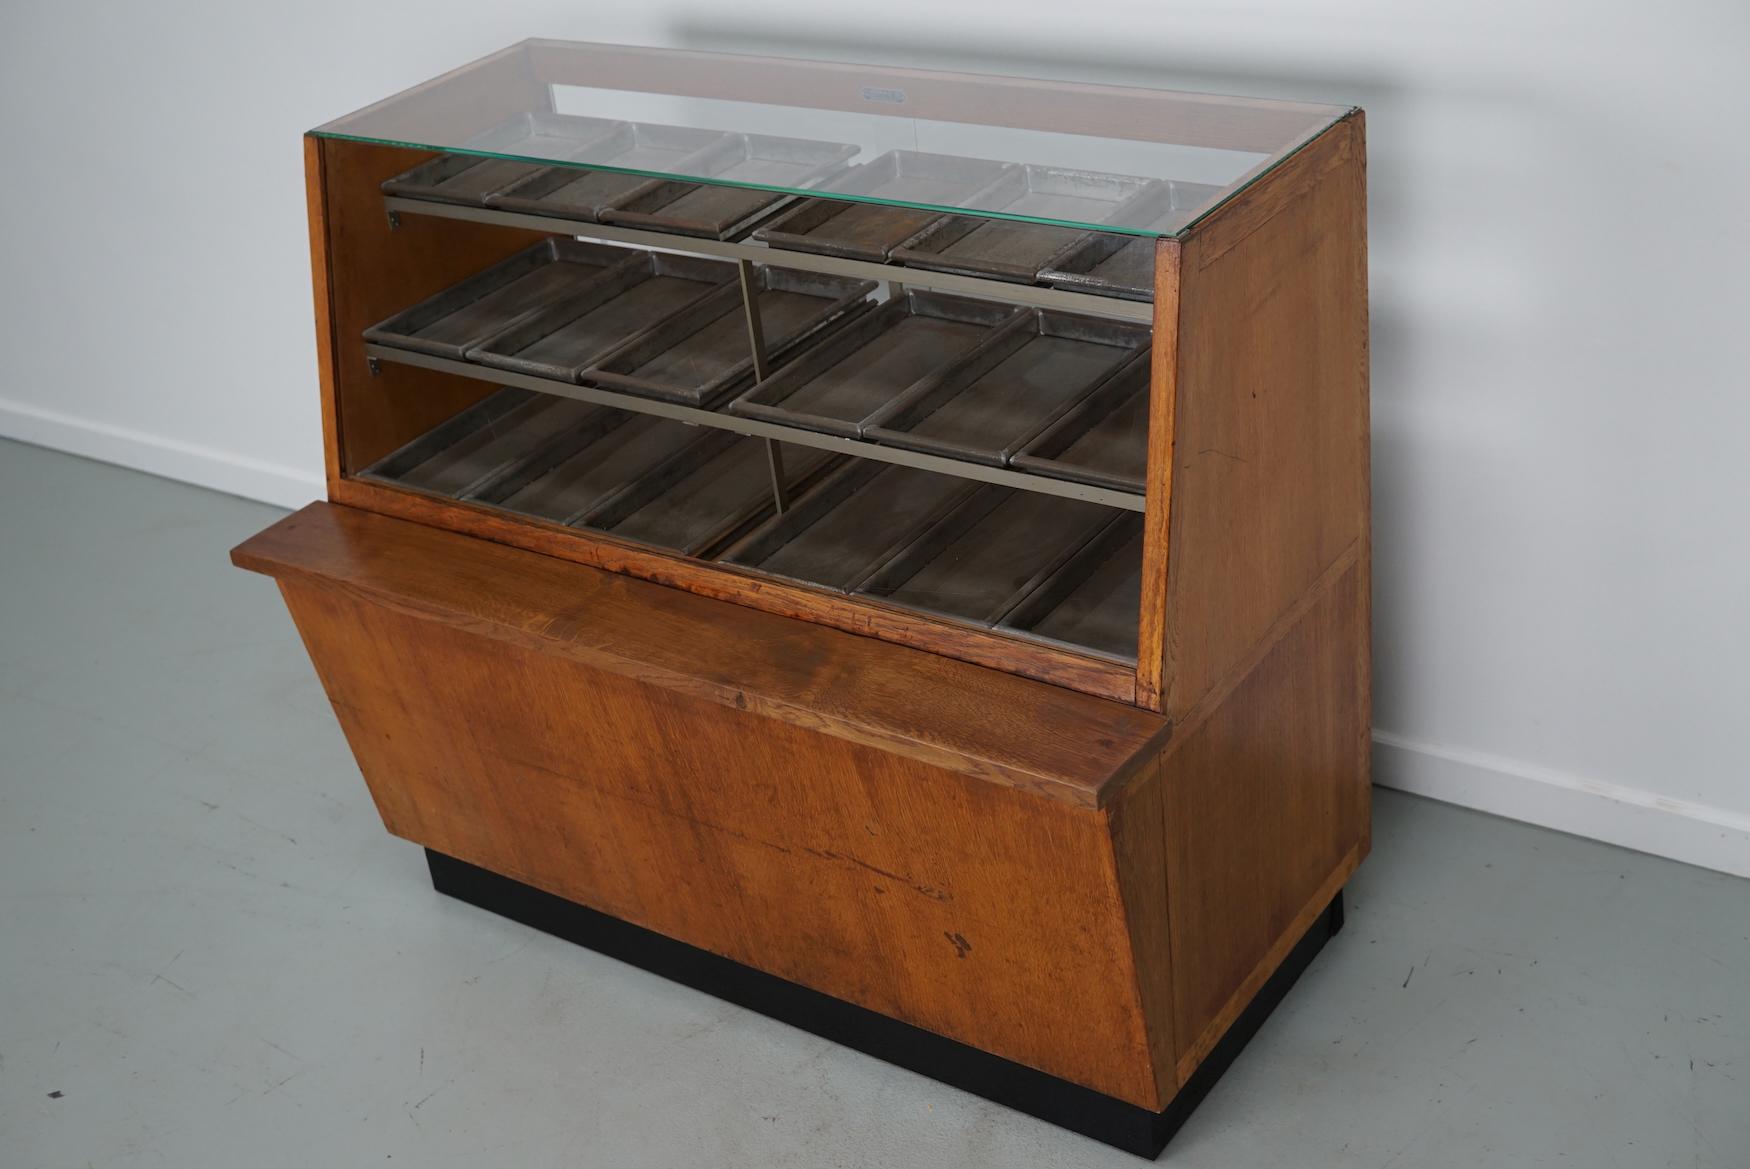 This vintage haberdashery shop counter dates from the 1950s and was made in the Netherlands. It features a wooden frame, glass casing and metal drawers / trays in different sizes D 21 / 28 / 35 x W 13 x H 2.5 cm. 